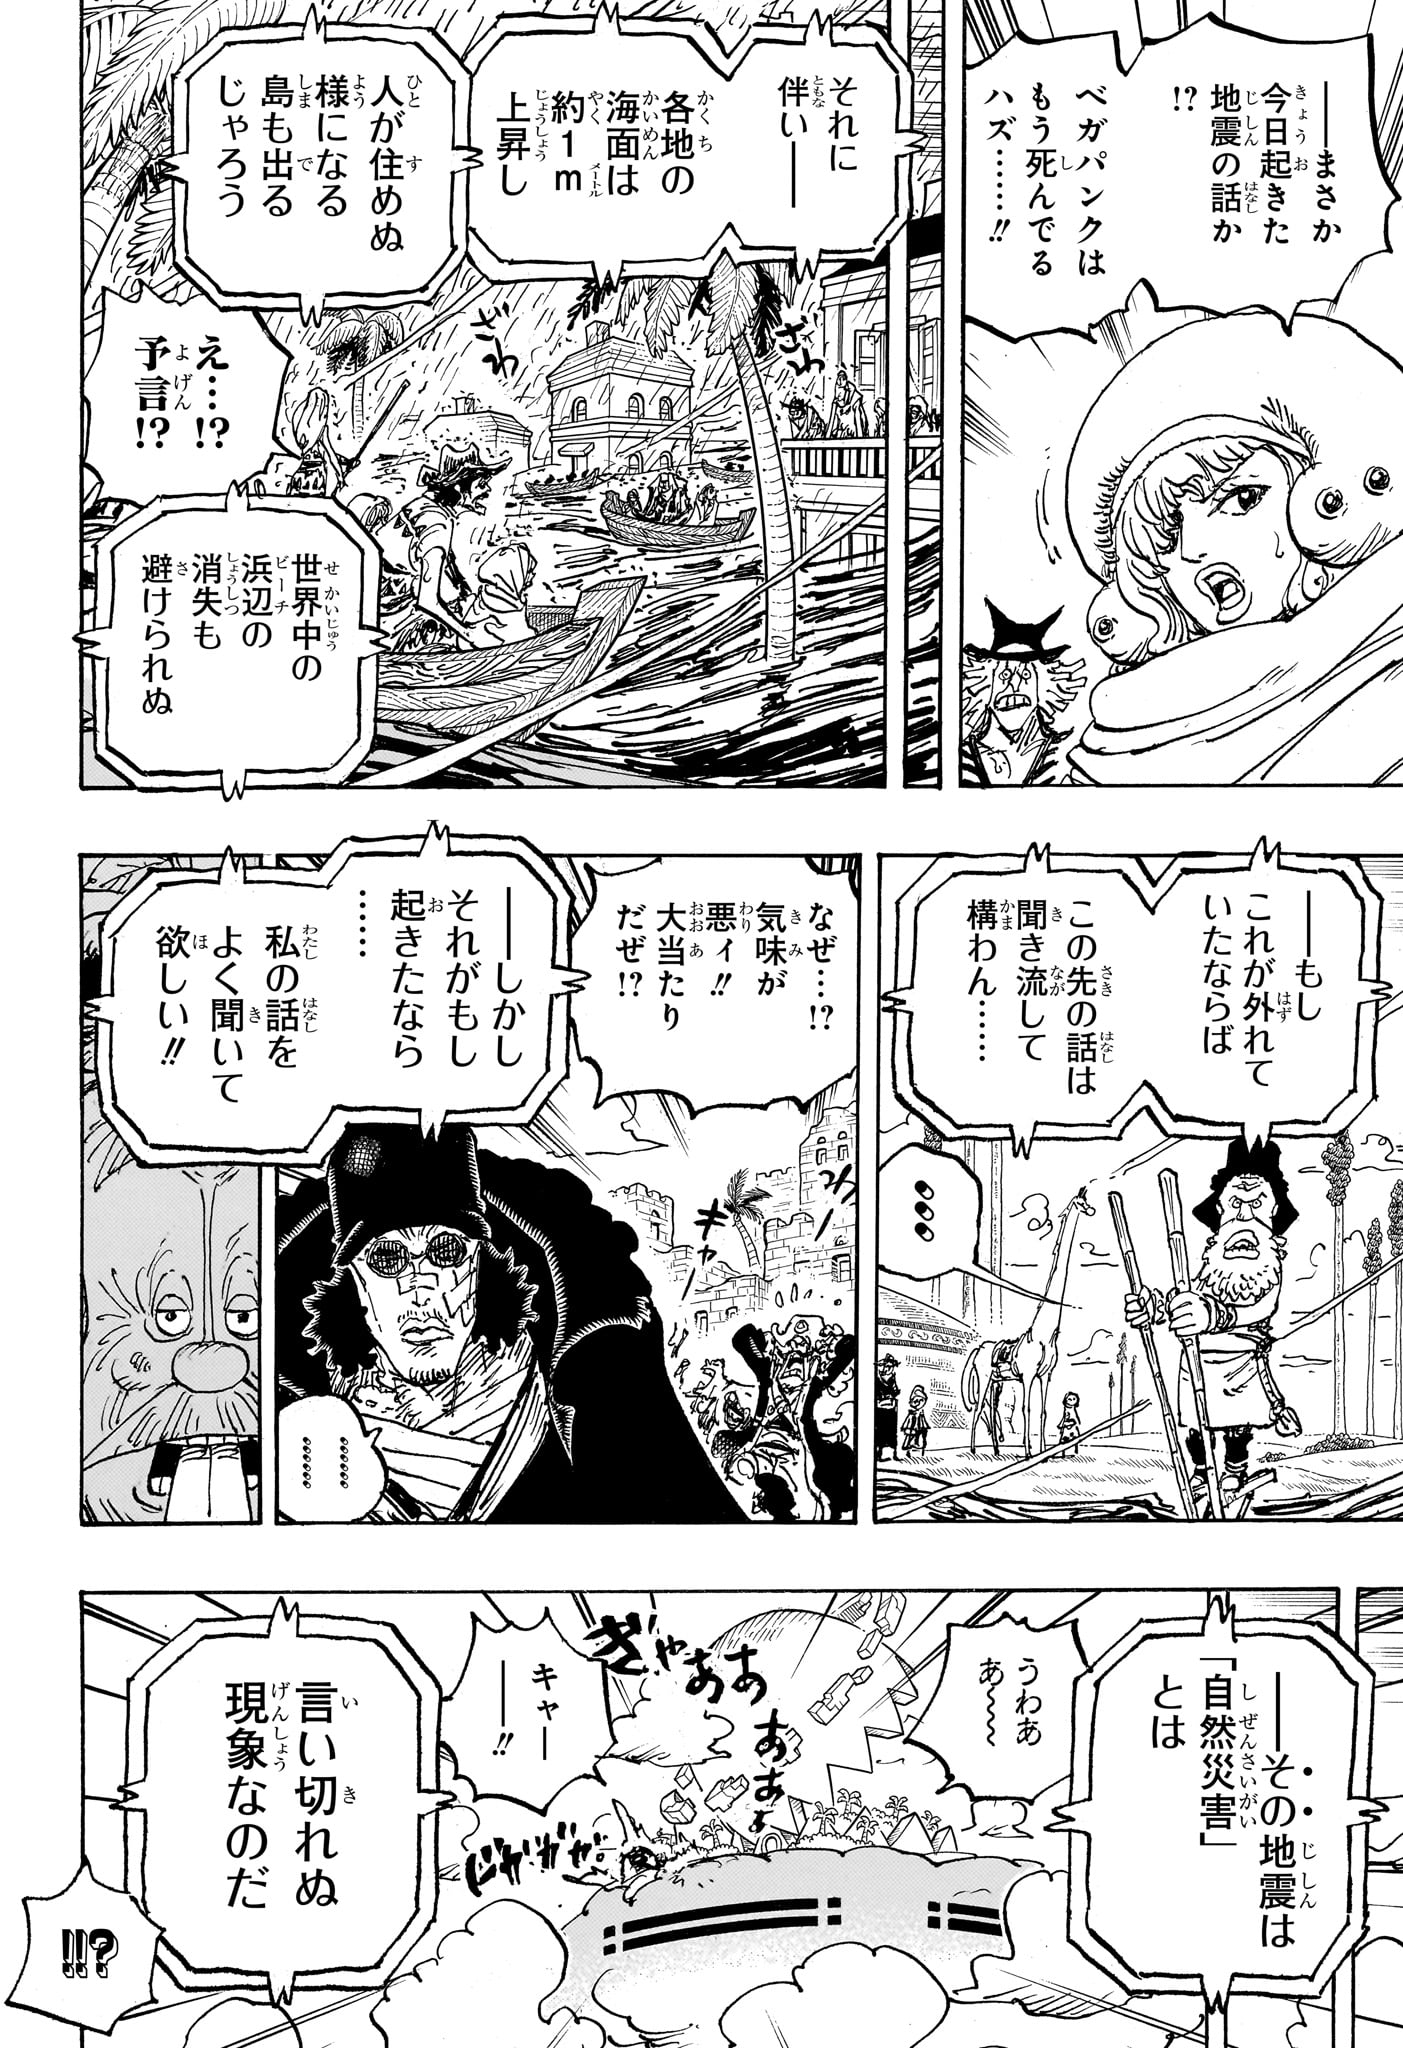 One Piece - Chapter 1114 - Page 6